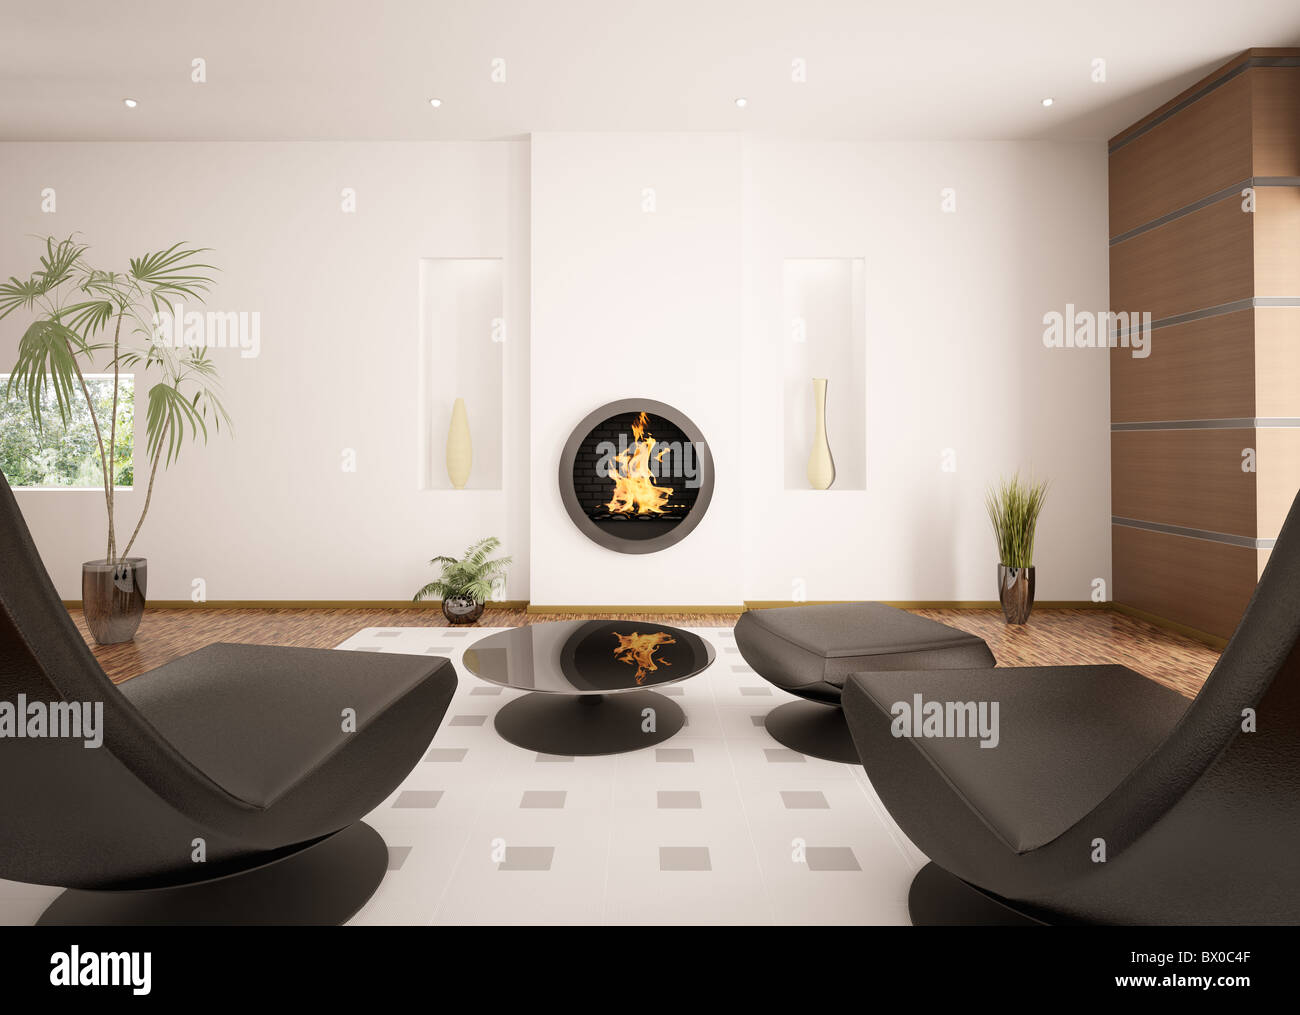 Modern interior of living room with fireplace and two black armchairs 3d render Stock Photo